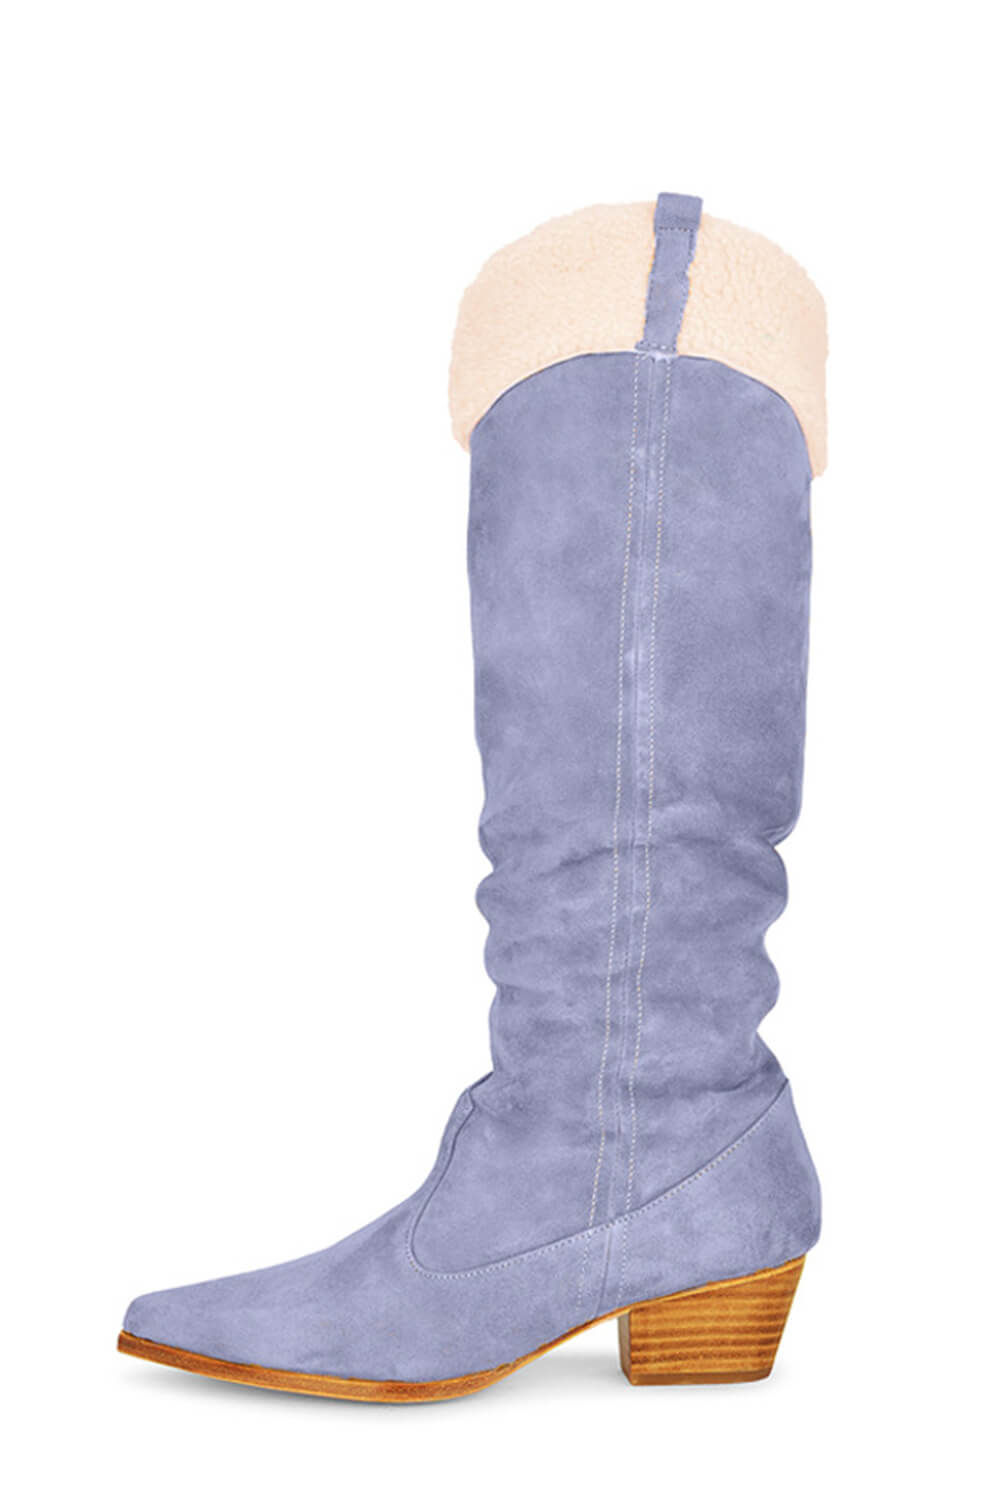 Suede Pointed Toe Western Cowboy Knee High Boots With Faux Fur Trim - Cornflower